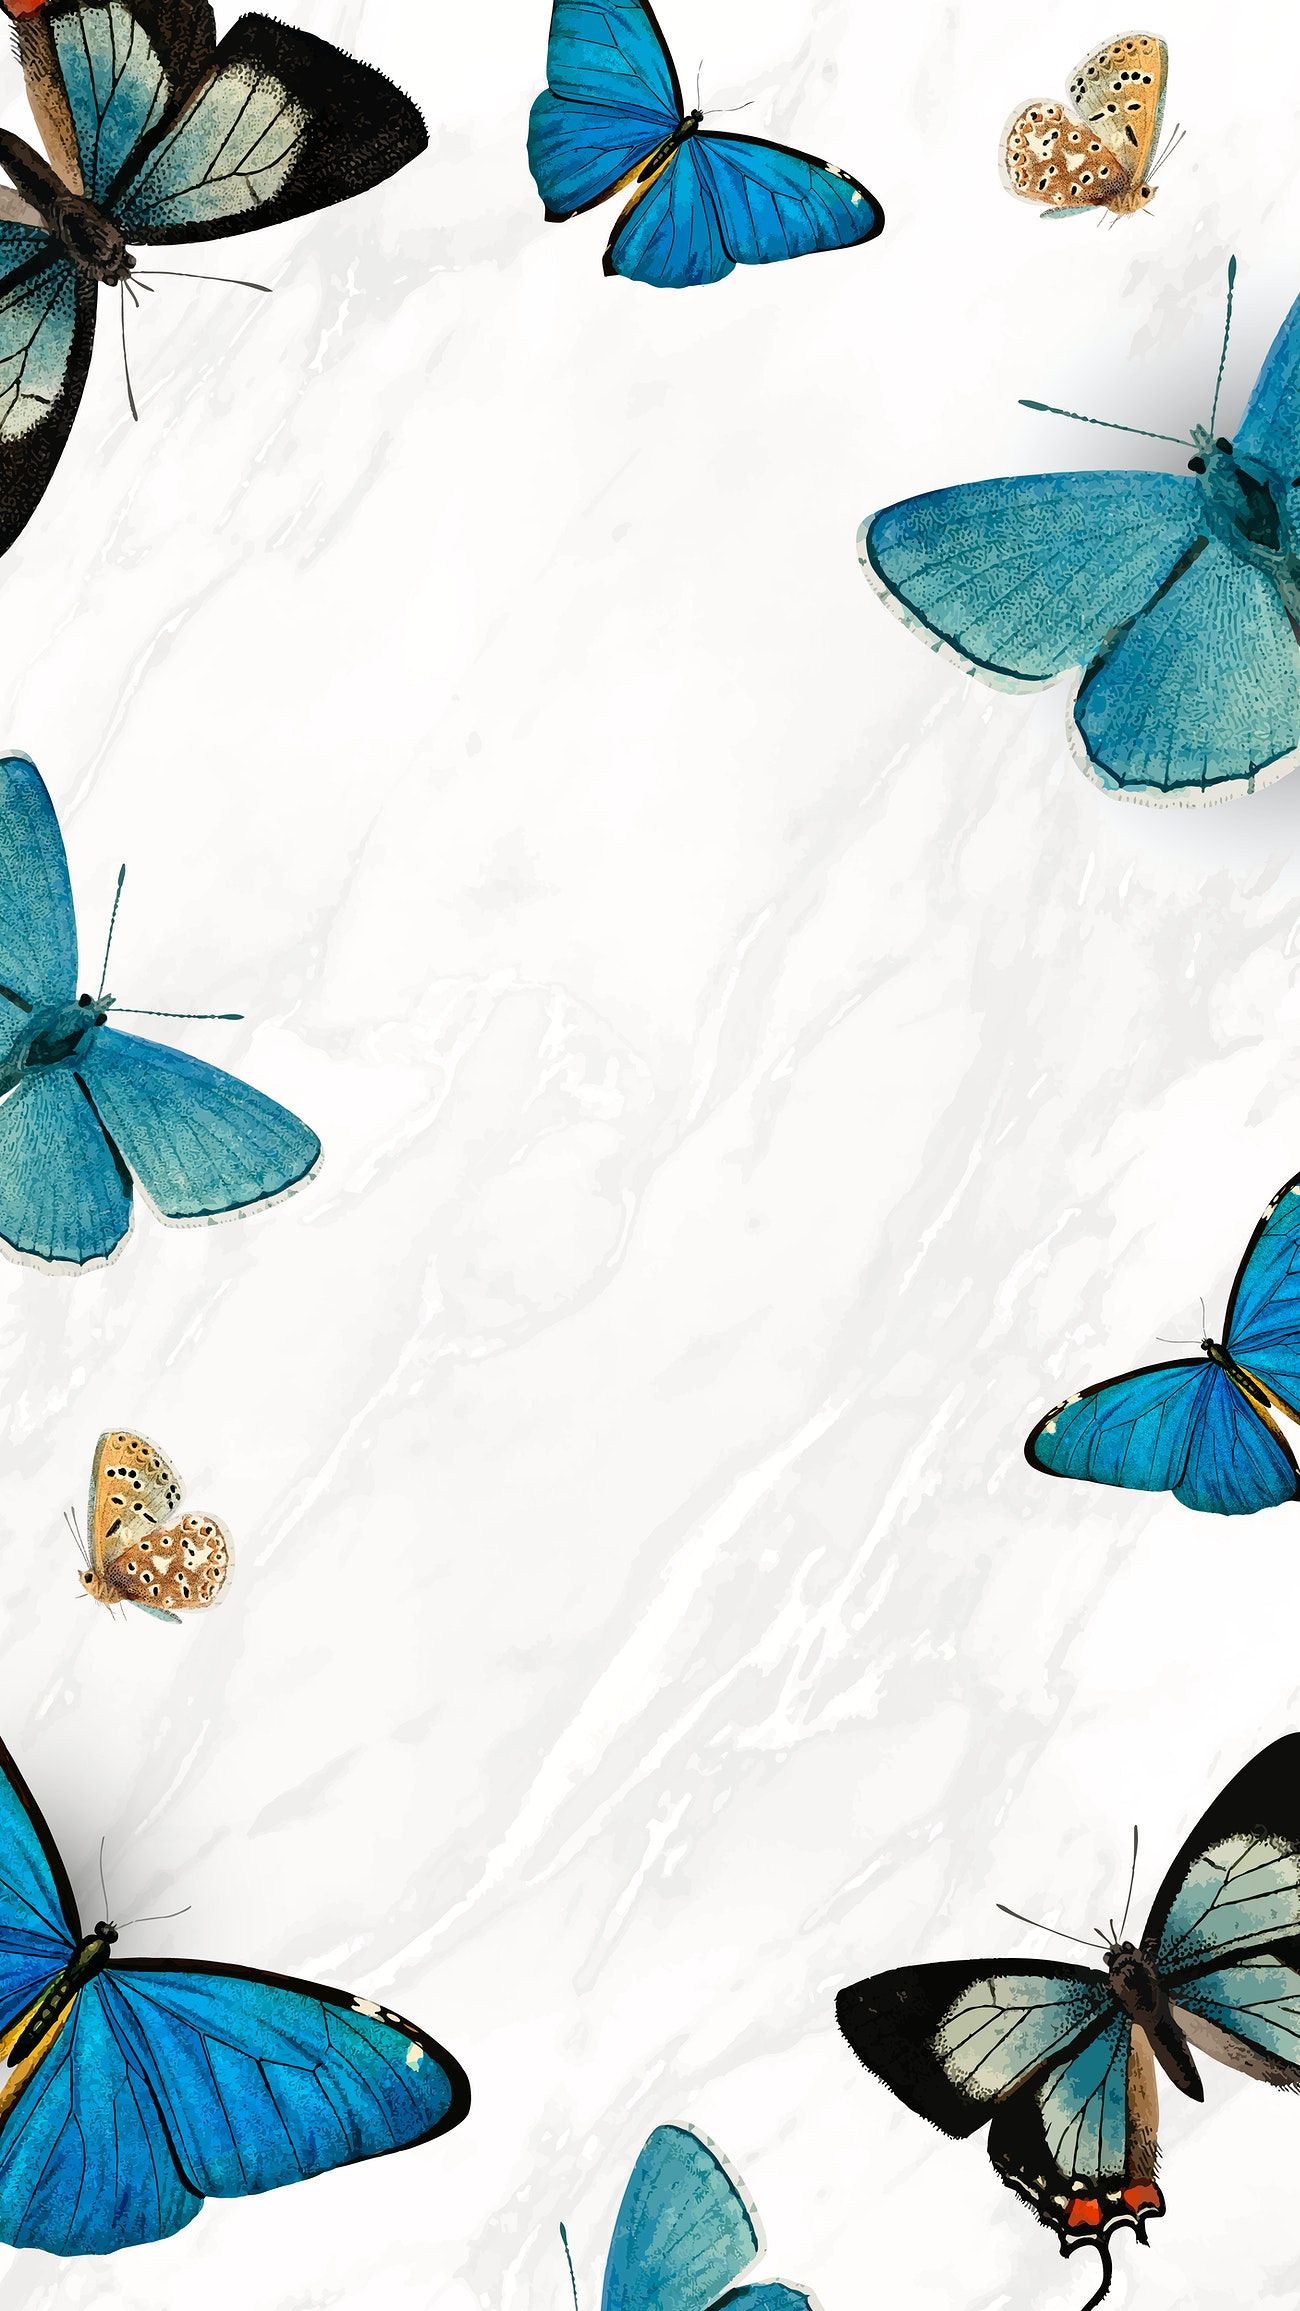 Butterfly phone wallpaper. Royalty free vector